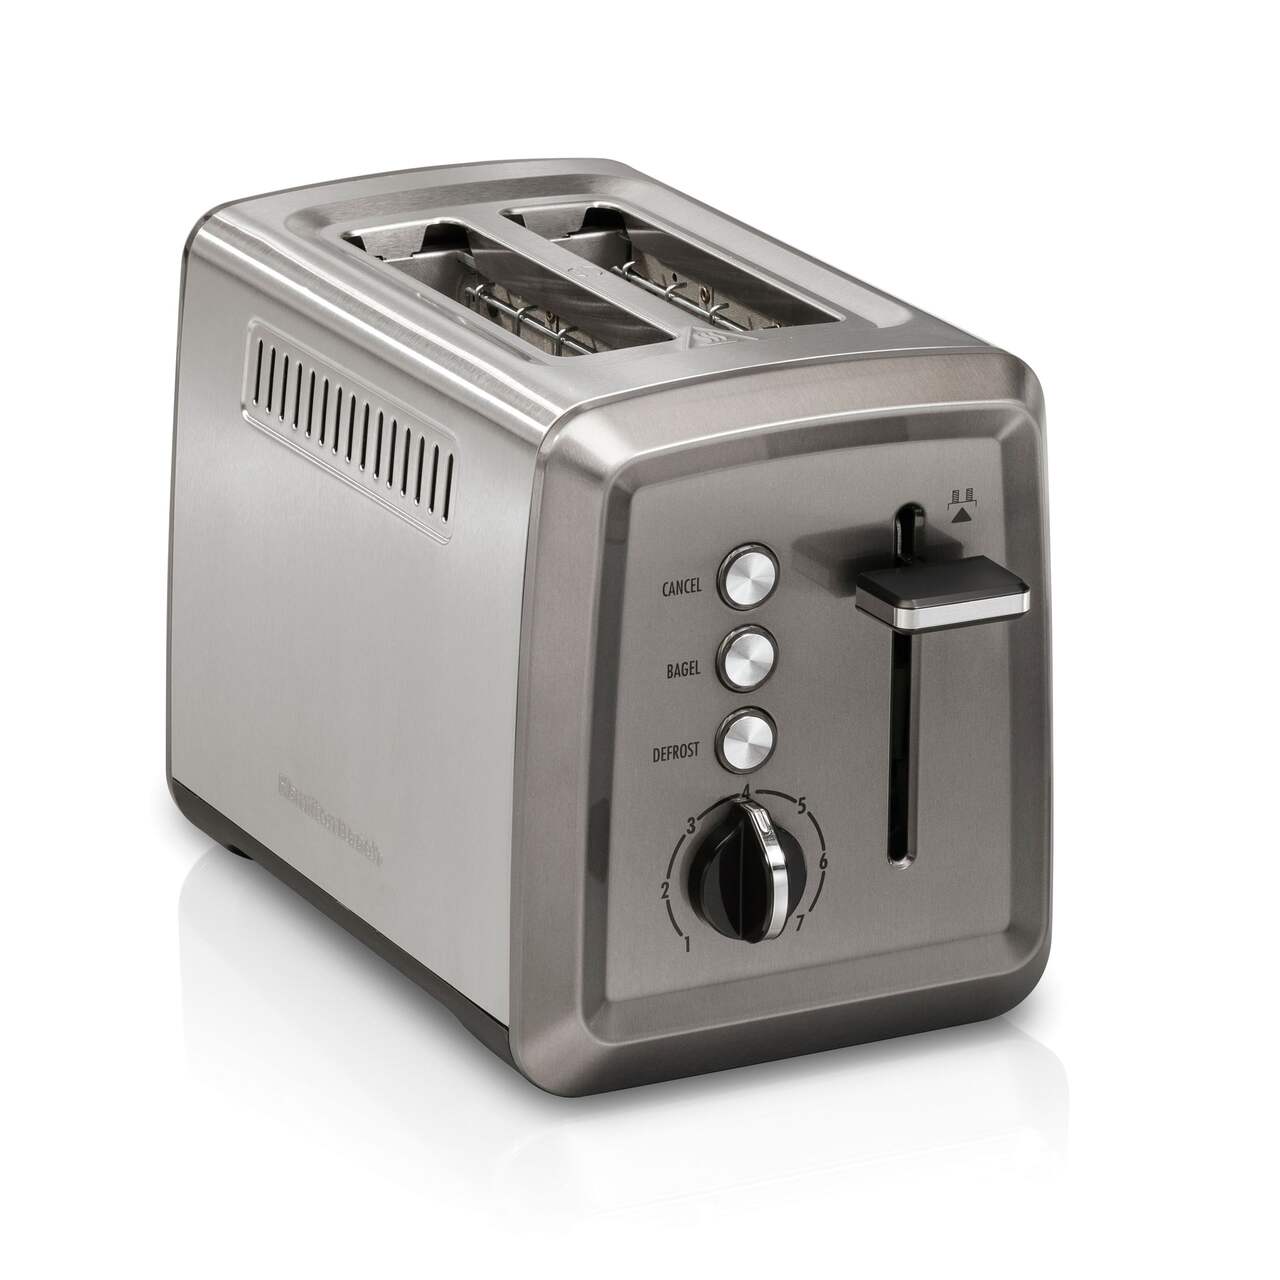 Hamilton Beach 4 Slice Toaster with Extra-Wide Slots, Bagel Setting, Toast  Boost, Slide-Out Crumb Tray, Auto-Shutoff & Cancel Button, Stainless Steel